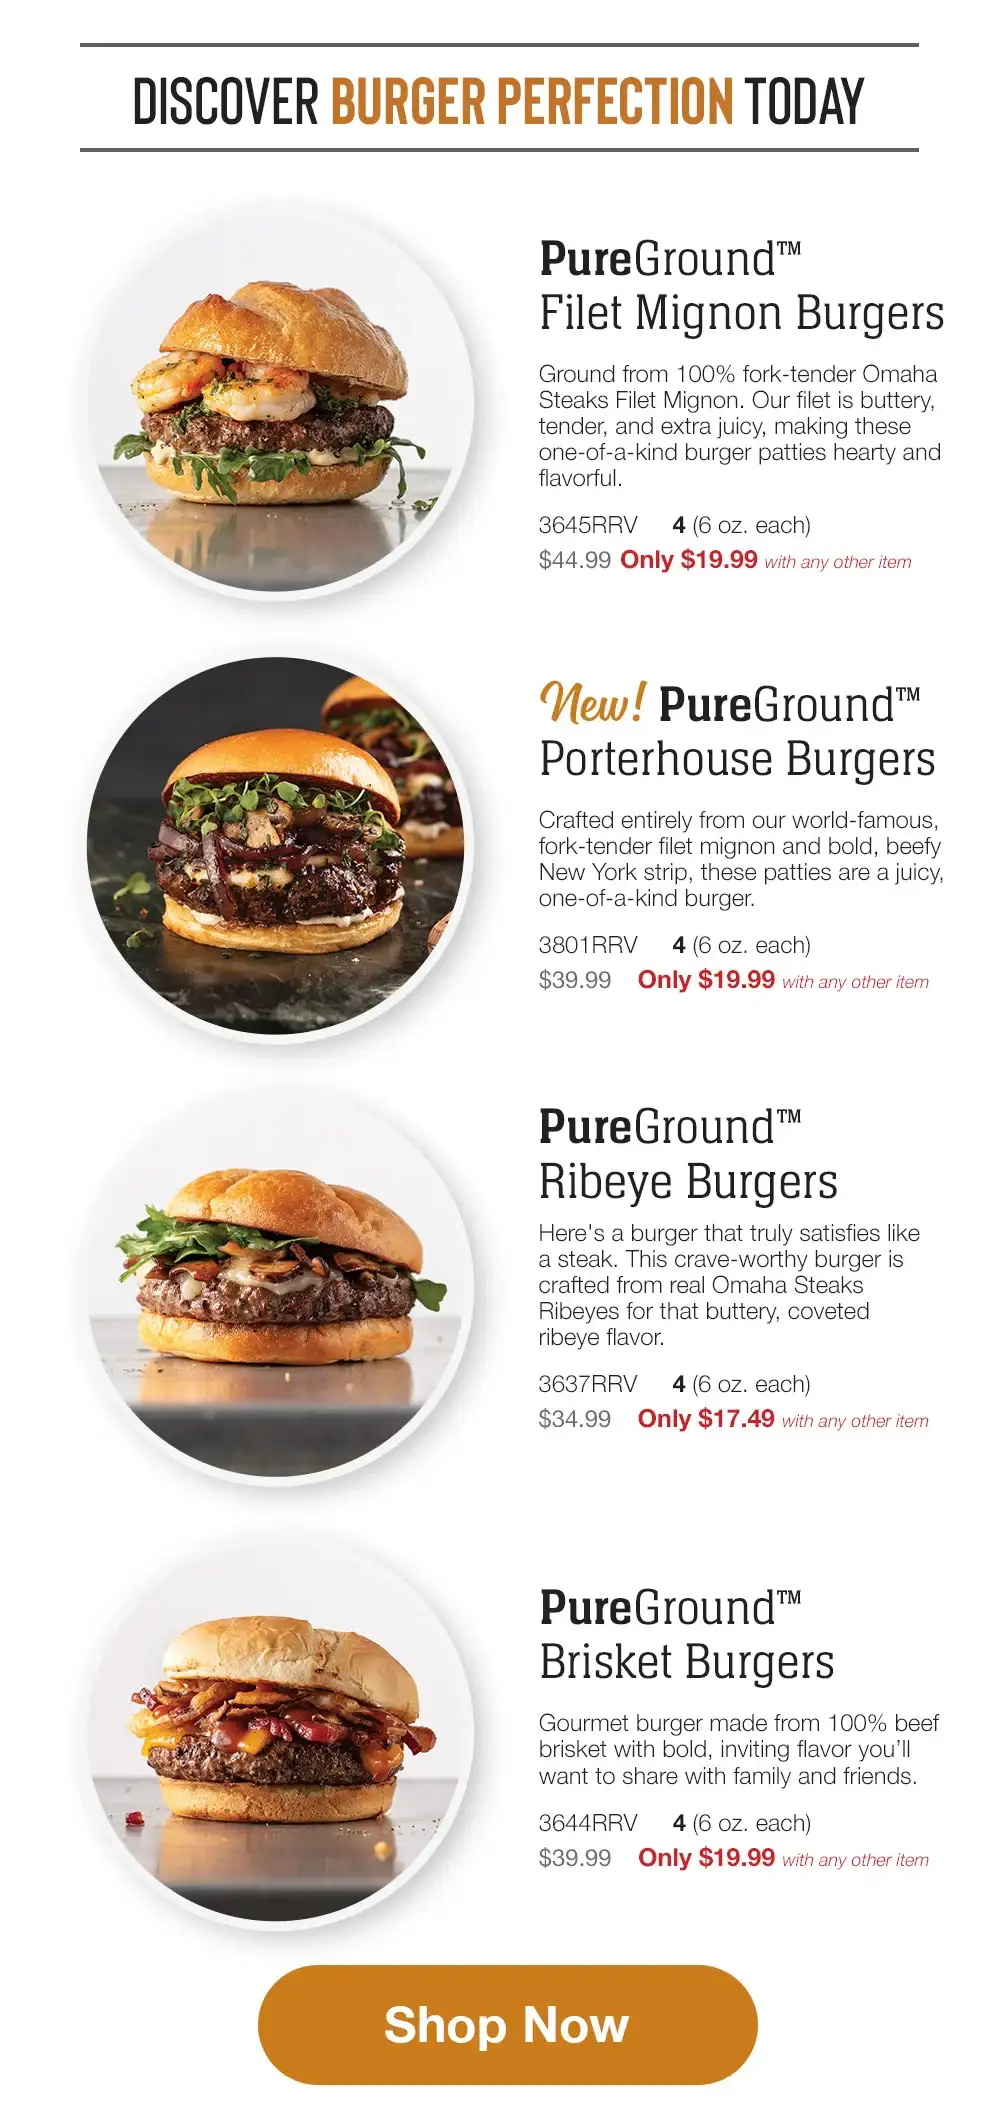 DISCOVER BURGER PERFECTION TODAY PureGround™™ Filet Mignon Burgers Ground from 100% fork-tender Omaha Steaks Filet Mignon. Our filet is buttery, tender, and extra juicy, making these one-of-a-kind burger patties hearty and flavorful. 3645RRV 4 (6 oz. each) \\$44.99 Only \\$19.99 with any other item New pureground Porterhouse Burgers Crafted entirely from our world-famous, fork-tender filet mignon and bold, beefy New York strip, these patties are a juicy, one-of-a-kind burger. 3801RRV \\$39.99 4 (6 oz. each) Only \\$19.99 with any other item PureGround™™ Ribeye Burgers Here's a burger that truly satisfies like a steak. This crave-worthy burger is crafted from real Omaha Steaks Ribeyes for that buttery, coveted ribeye flavor. 3637RRV 4(6 oz. each) \\$34.99 Only \\$17.49 with any other item Private Reserve® Wagyu Burgers Nothing is richer. Nothing is more indulgent. Nothing is more flavorful than these exquisite wagyu burgers. 3644RRV 4 (6 oz. each) \\$39.99 Only \\$19.99 with any other item Shop Now 